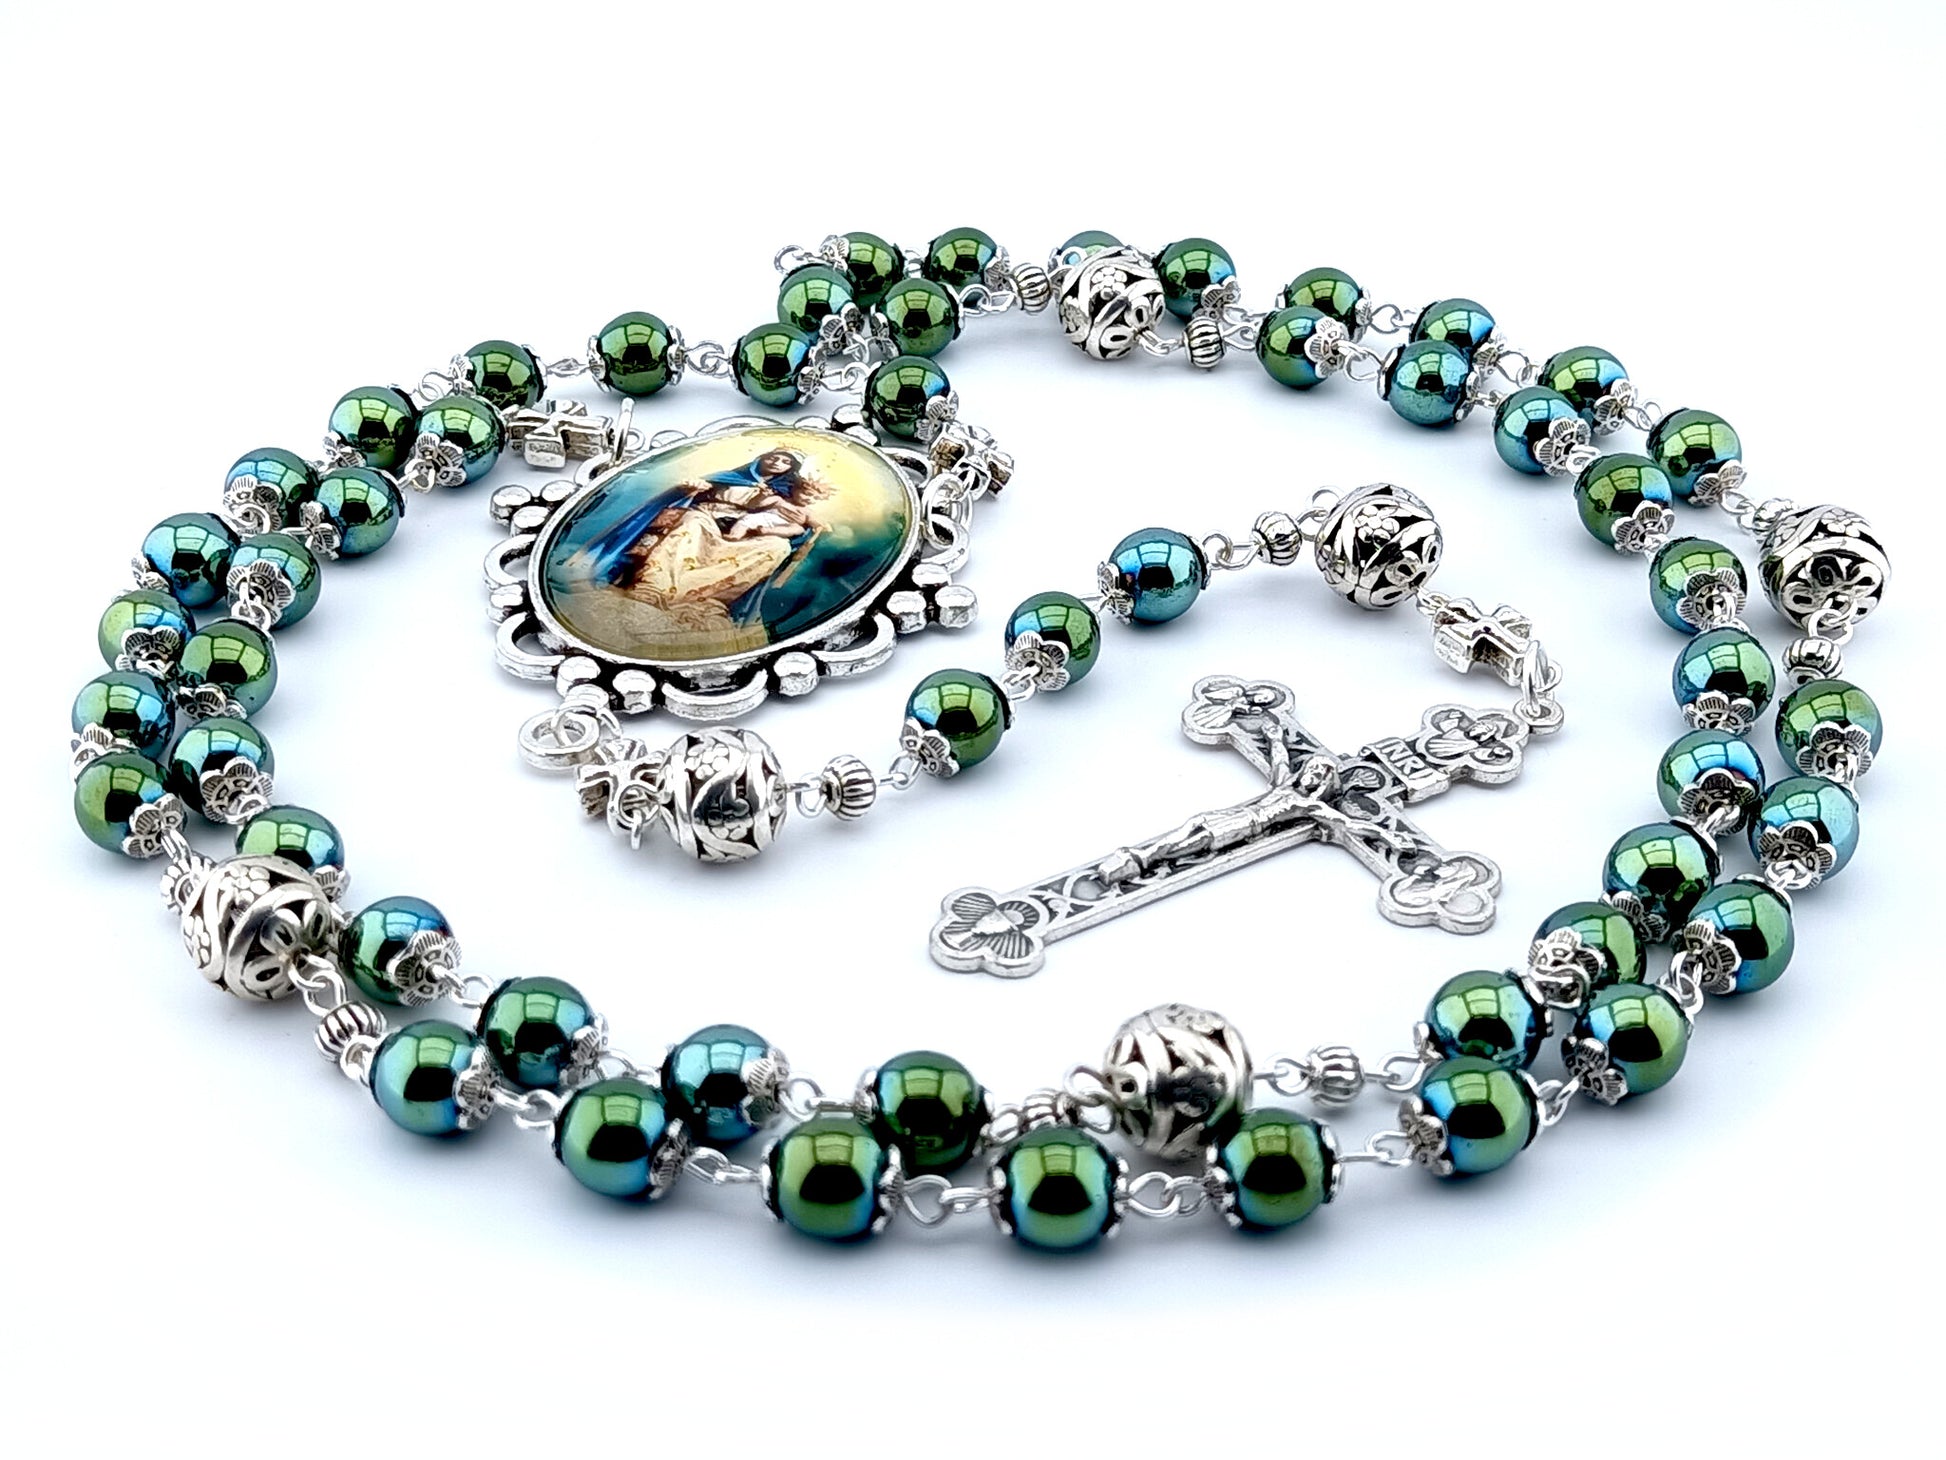 Our Lady of Mount Carmel unique rosary beads with blue green hematite gemstone beads, silver pater beads, crucifix and picture centre medal.